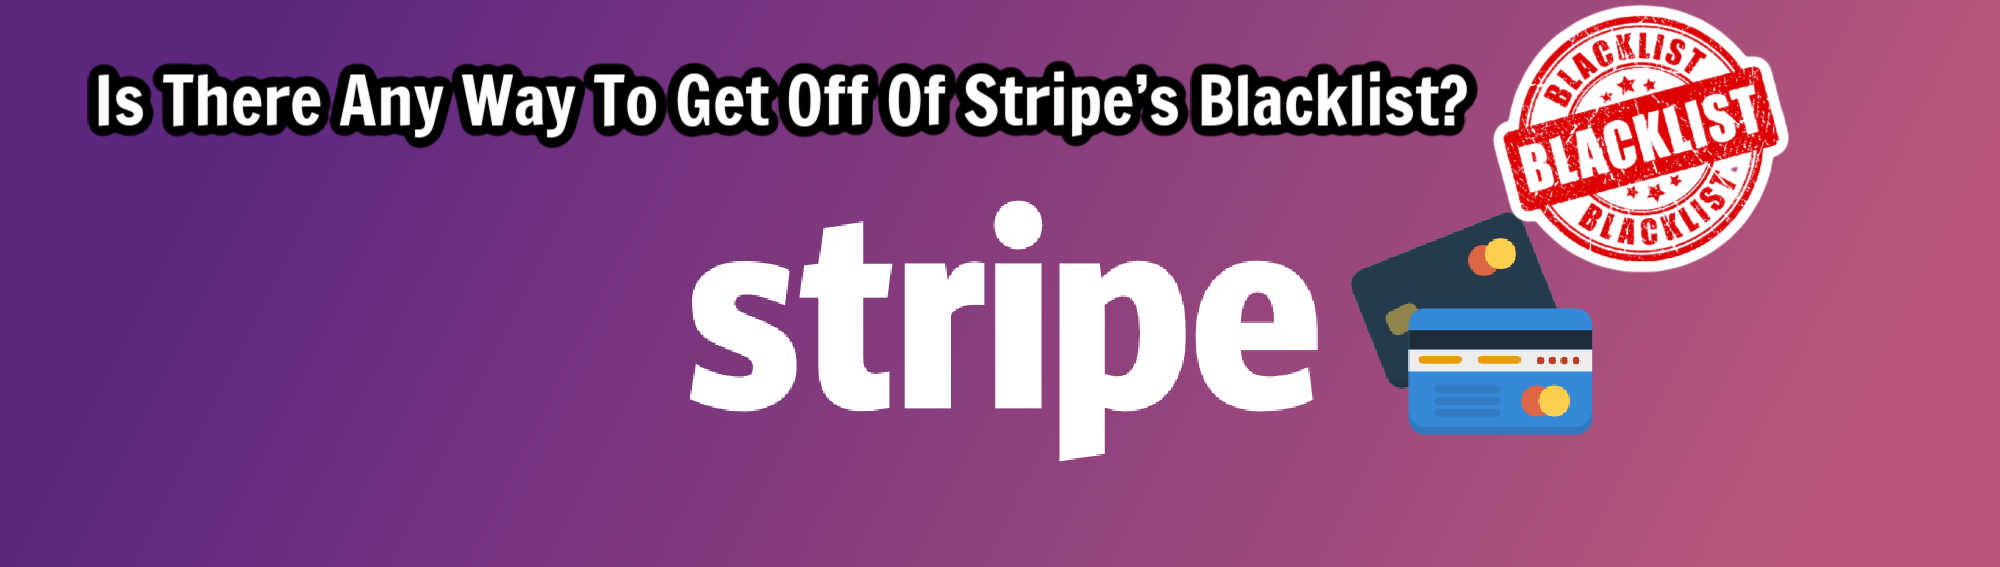 image of is there any way to get off stripes blacklist